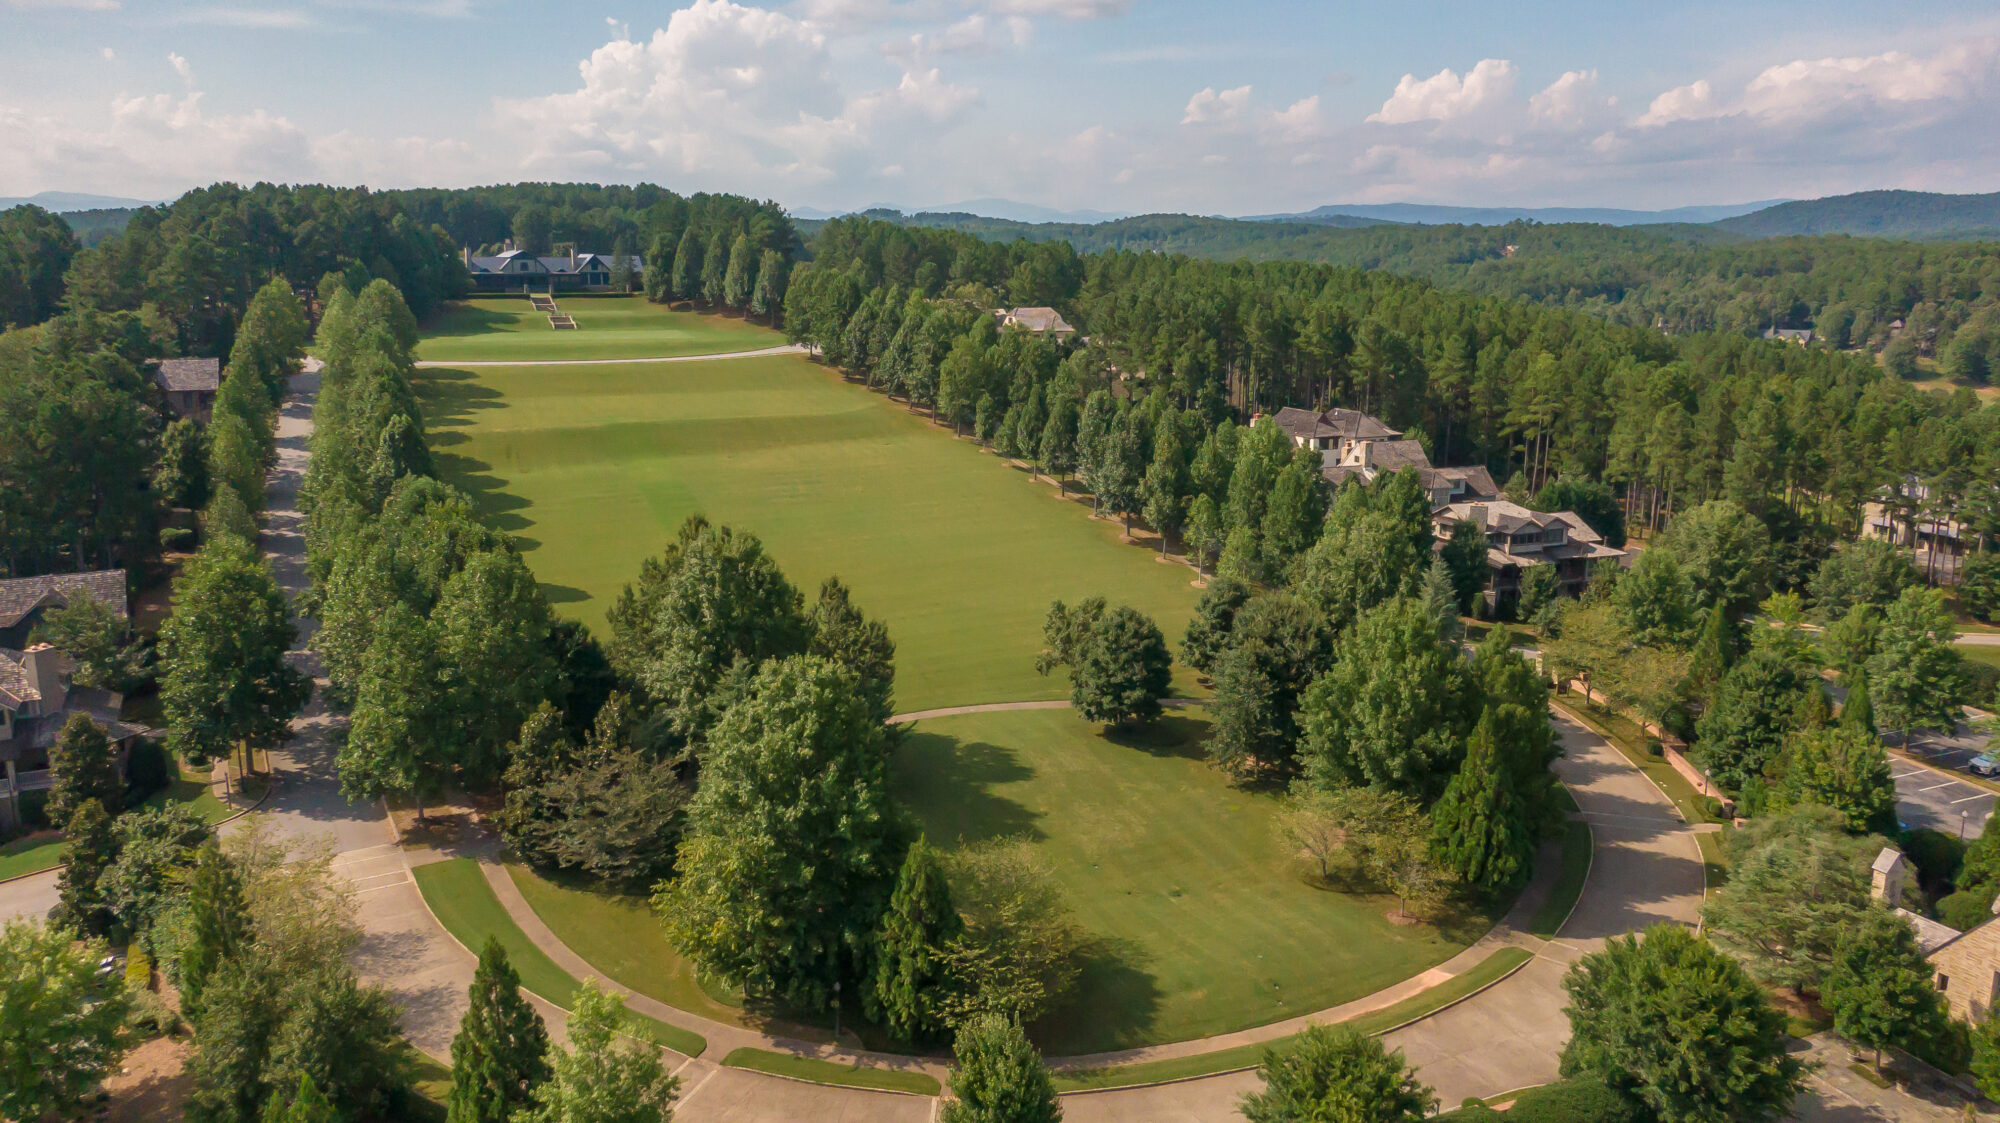 Life Beyond the Lake at The Reserve at Lake Keowee: New Disc Golf Course and More!